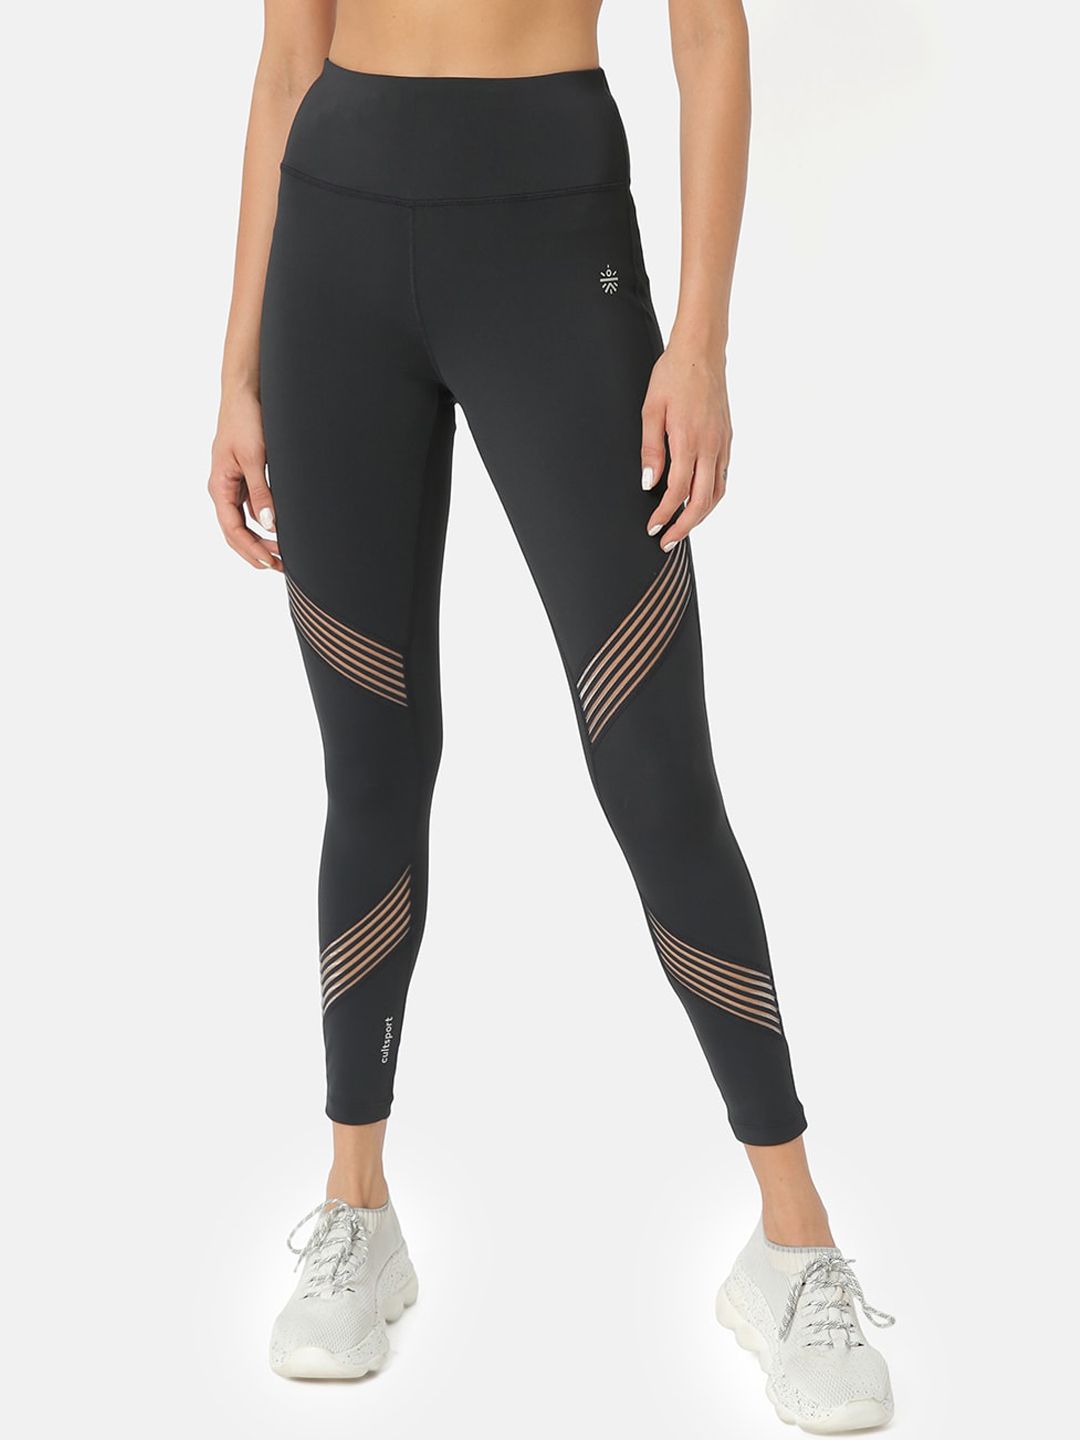 Cultsport Women Black Solid Training Tights Price in India